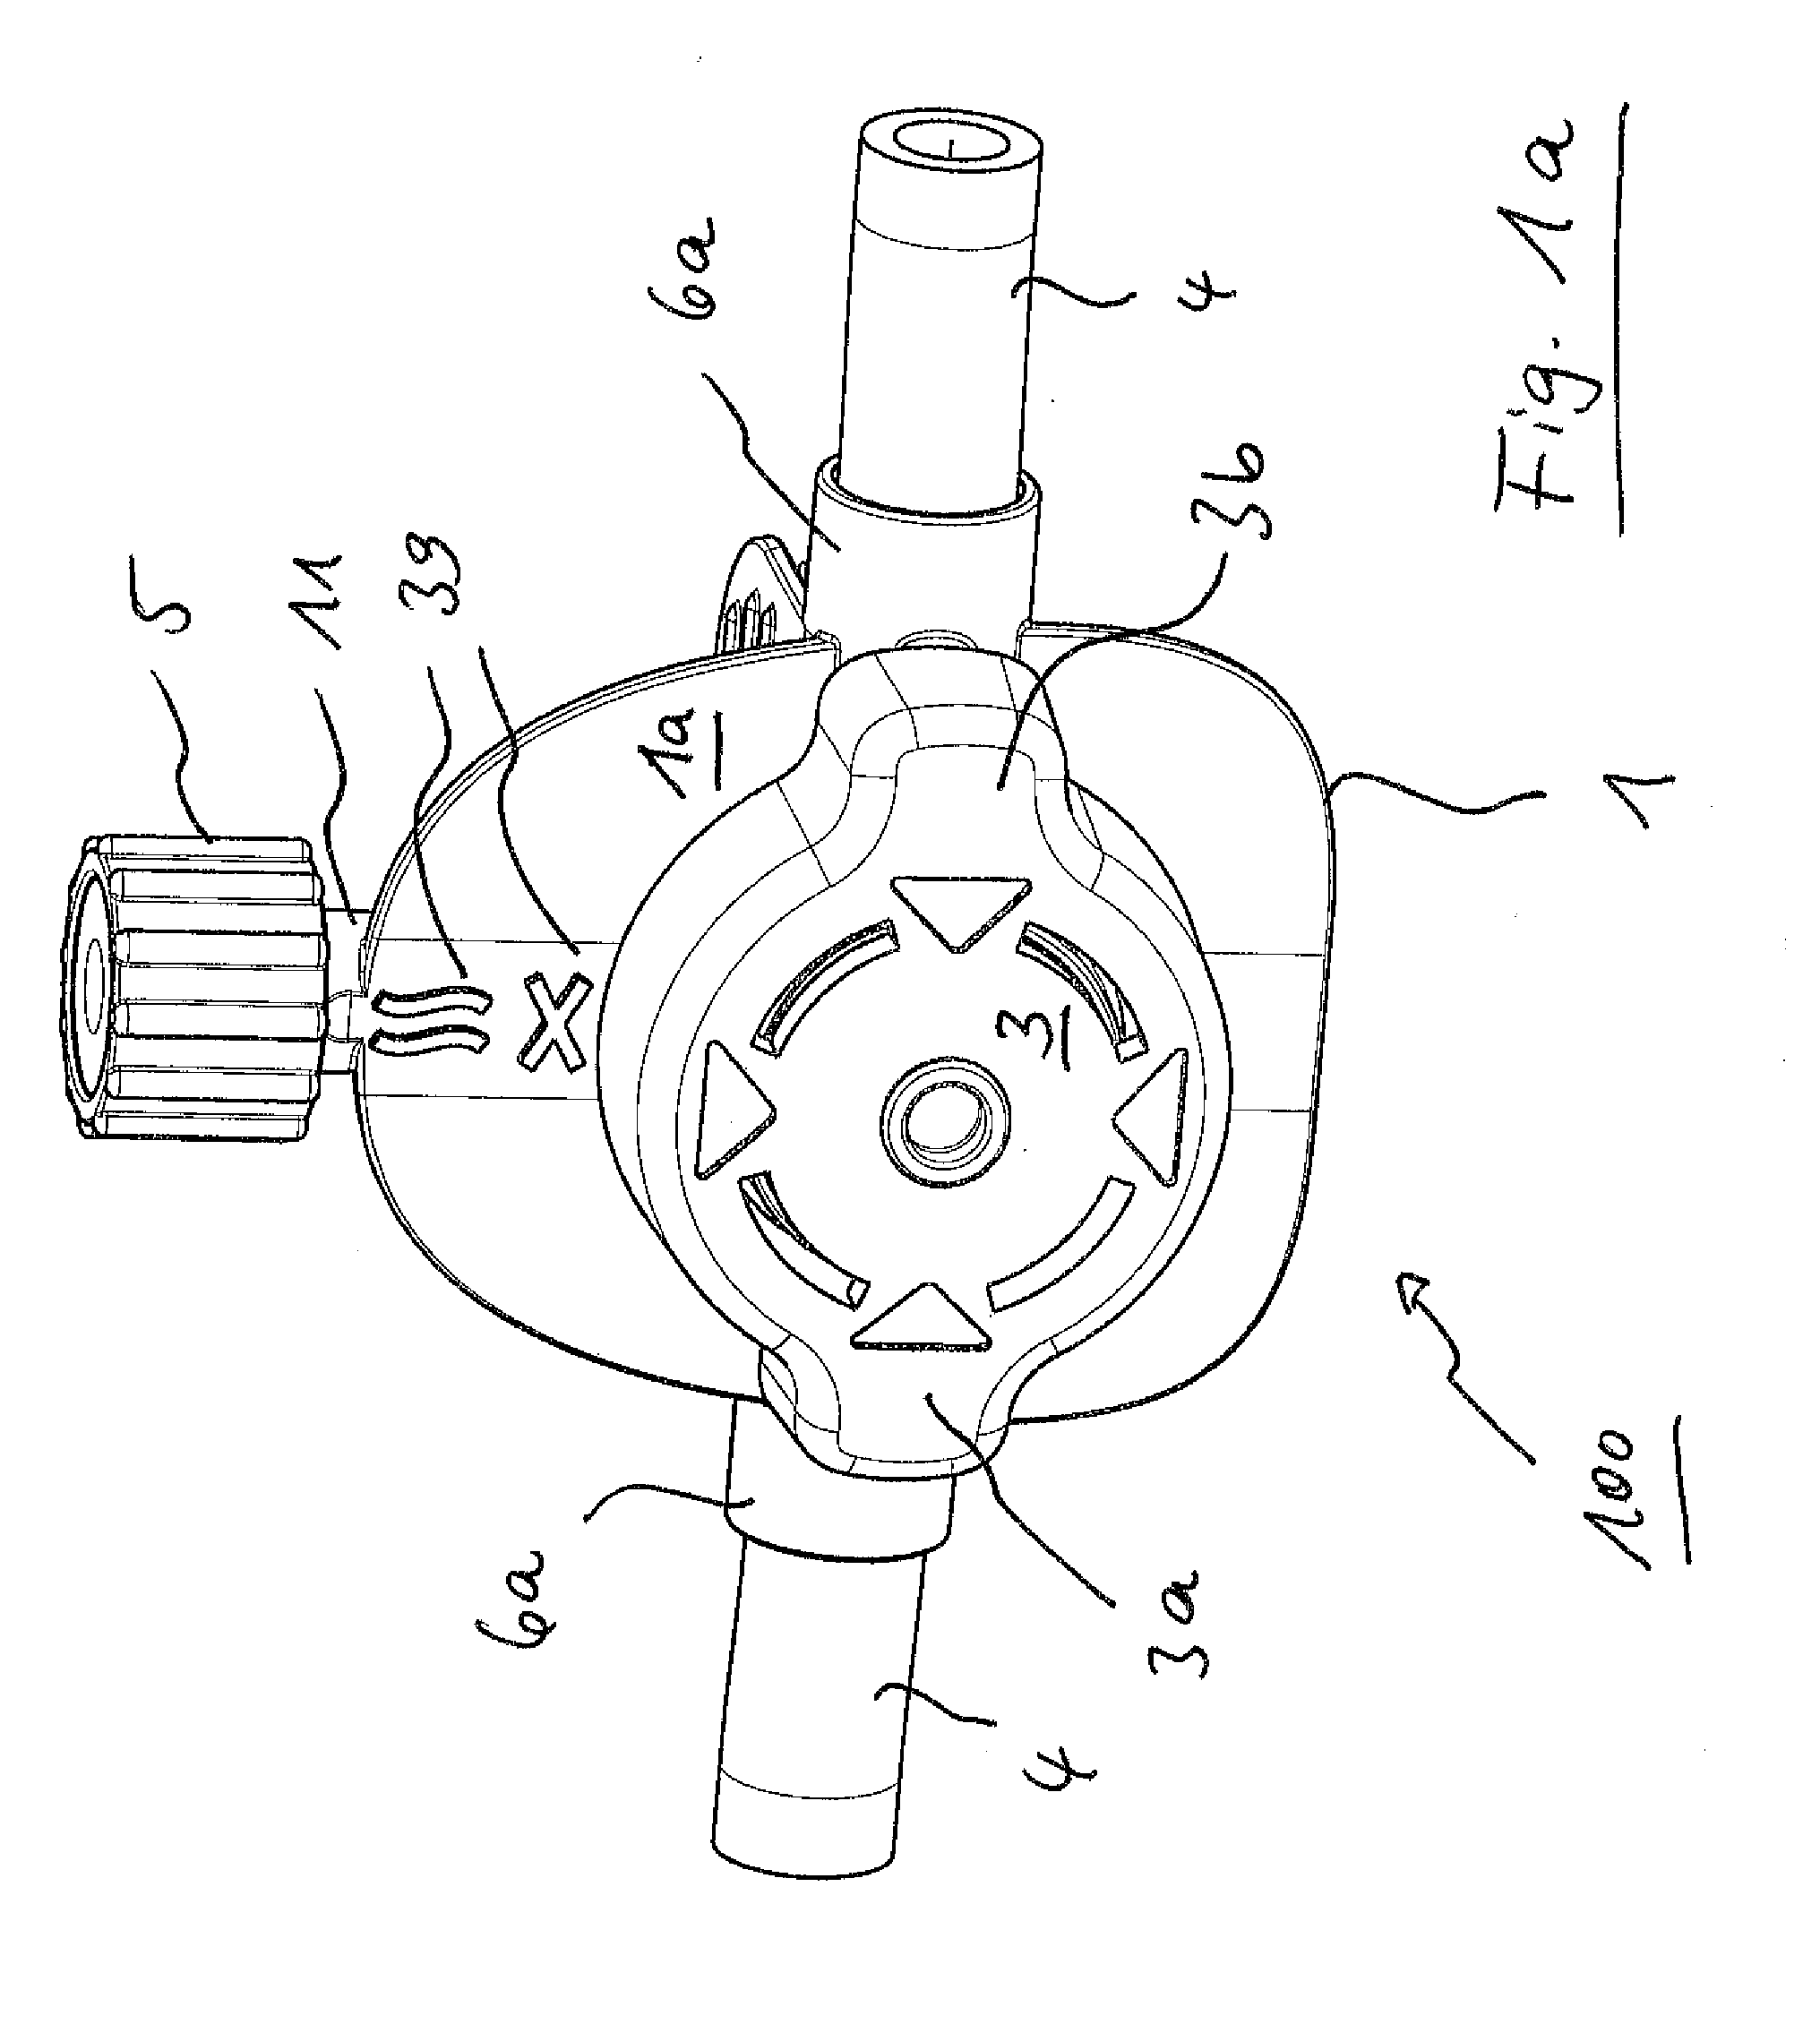 Medical port, blood hose for use in an extracorporeal blood treatment as well as medical treatment appratus